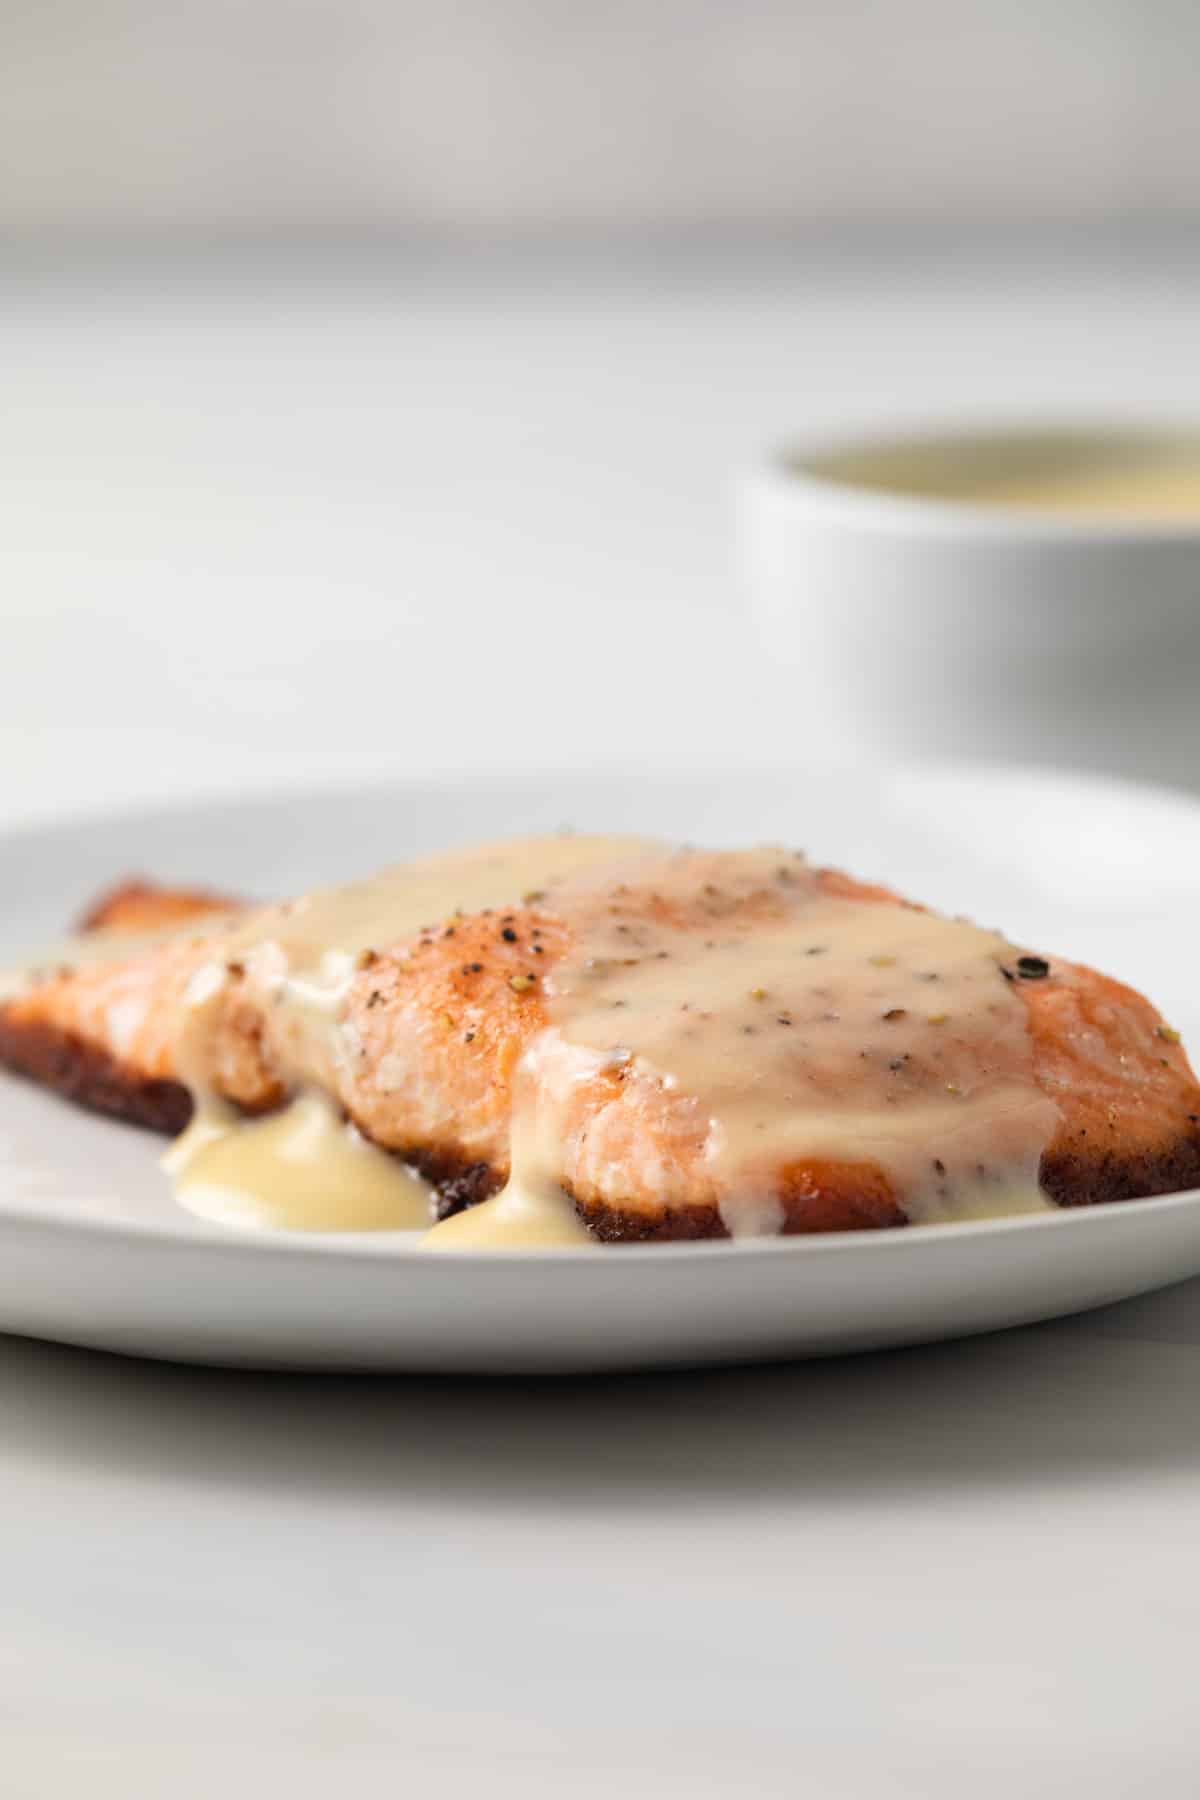 Salmon topped with beurre blanc sauce.